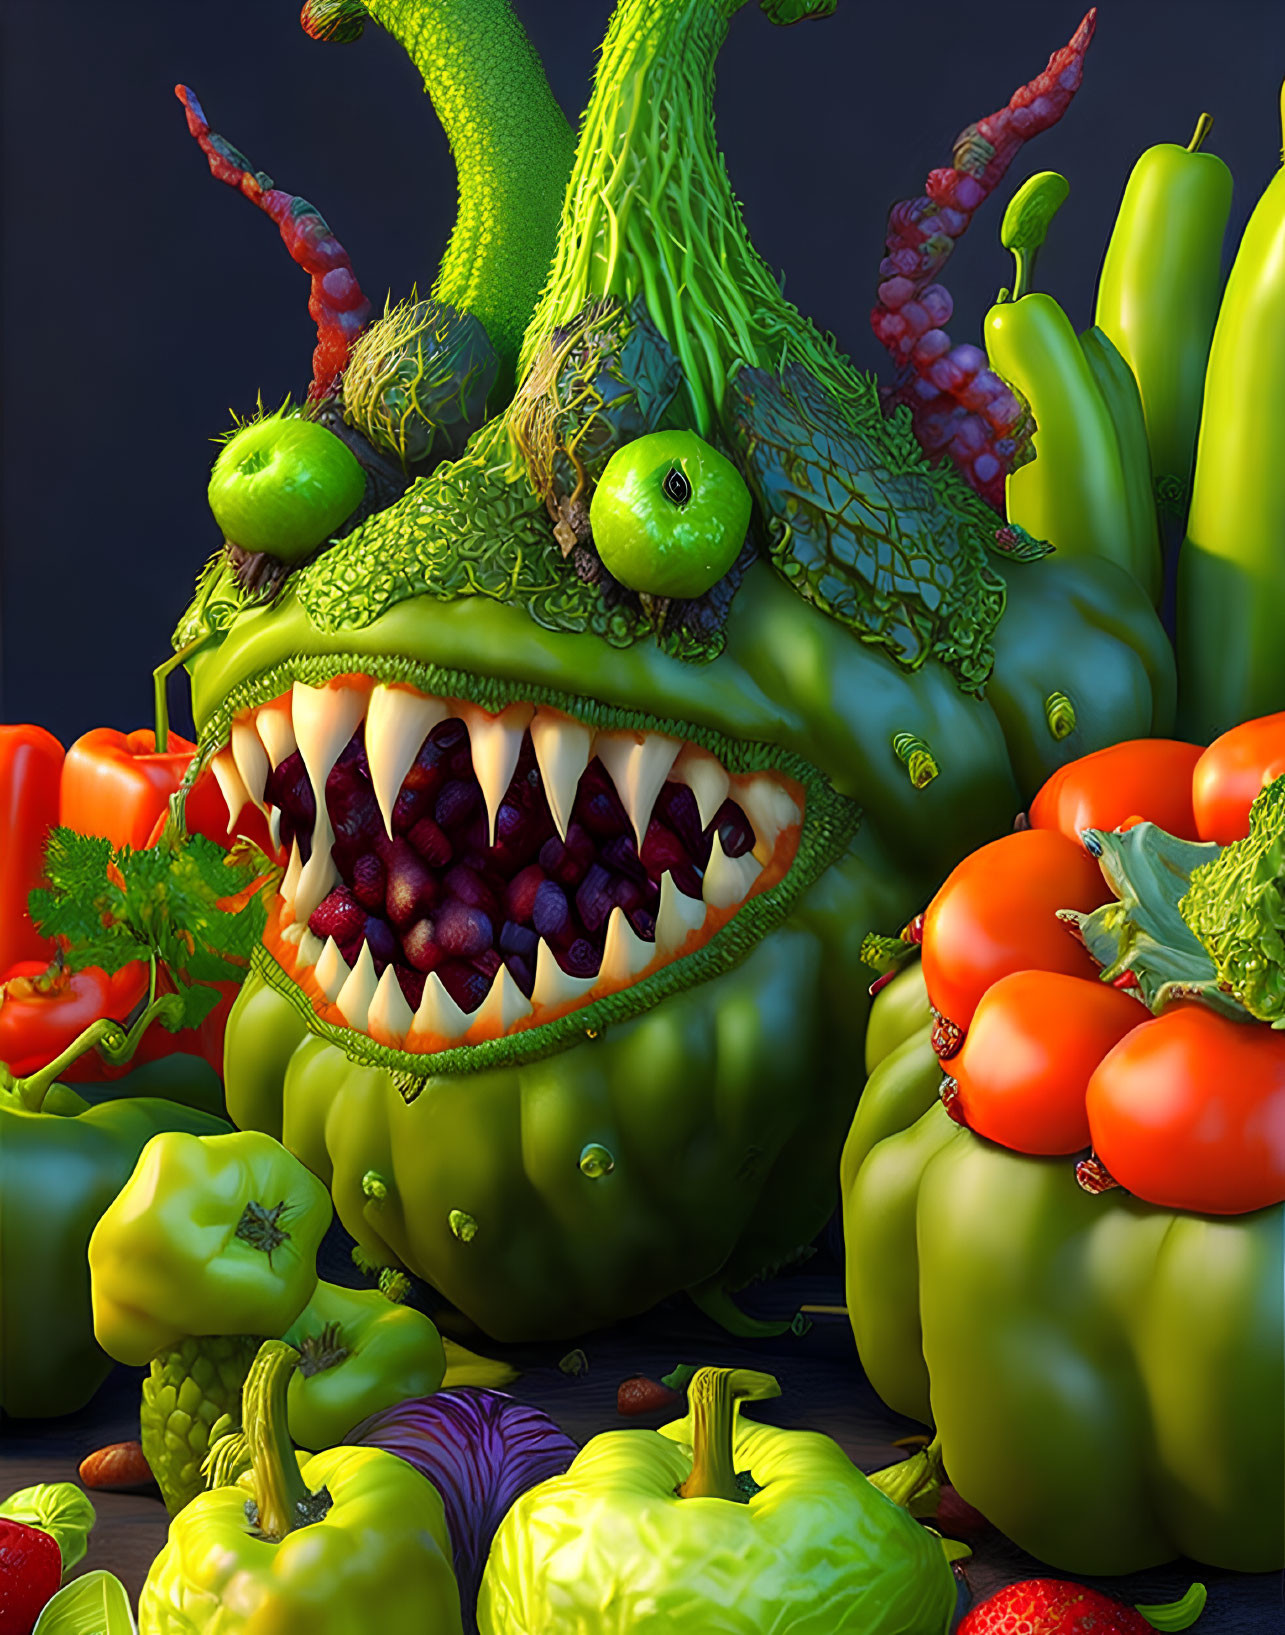 Whimsical digital artwork of vegetable monster with wide mouth